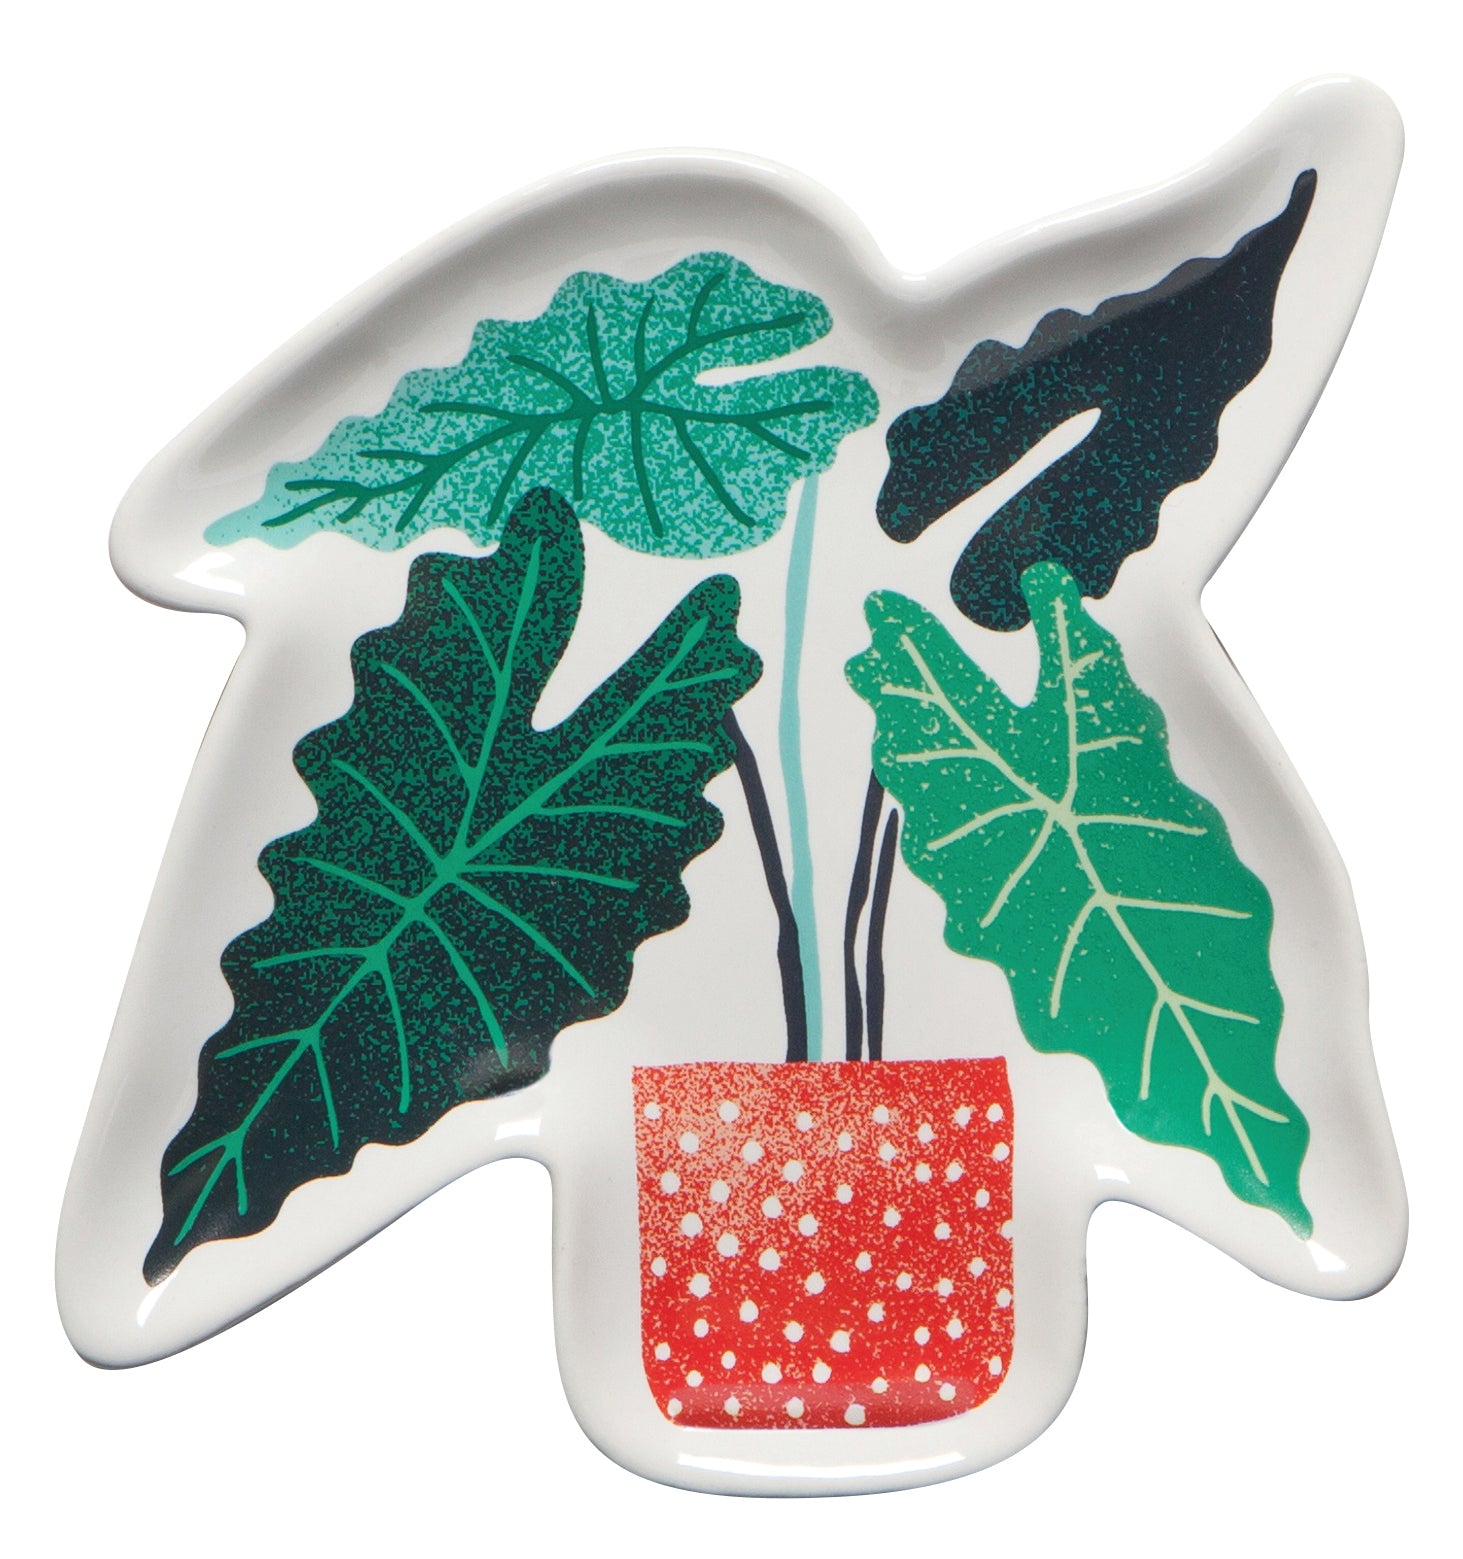 Let It Grow Shaped Dishes, Set of 3